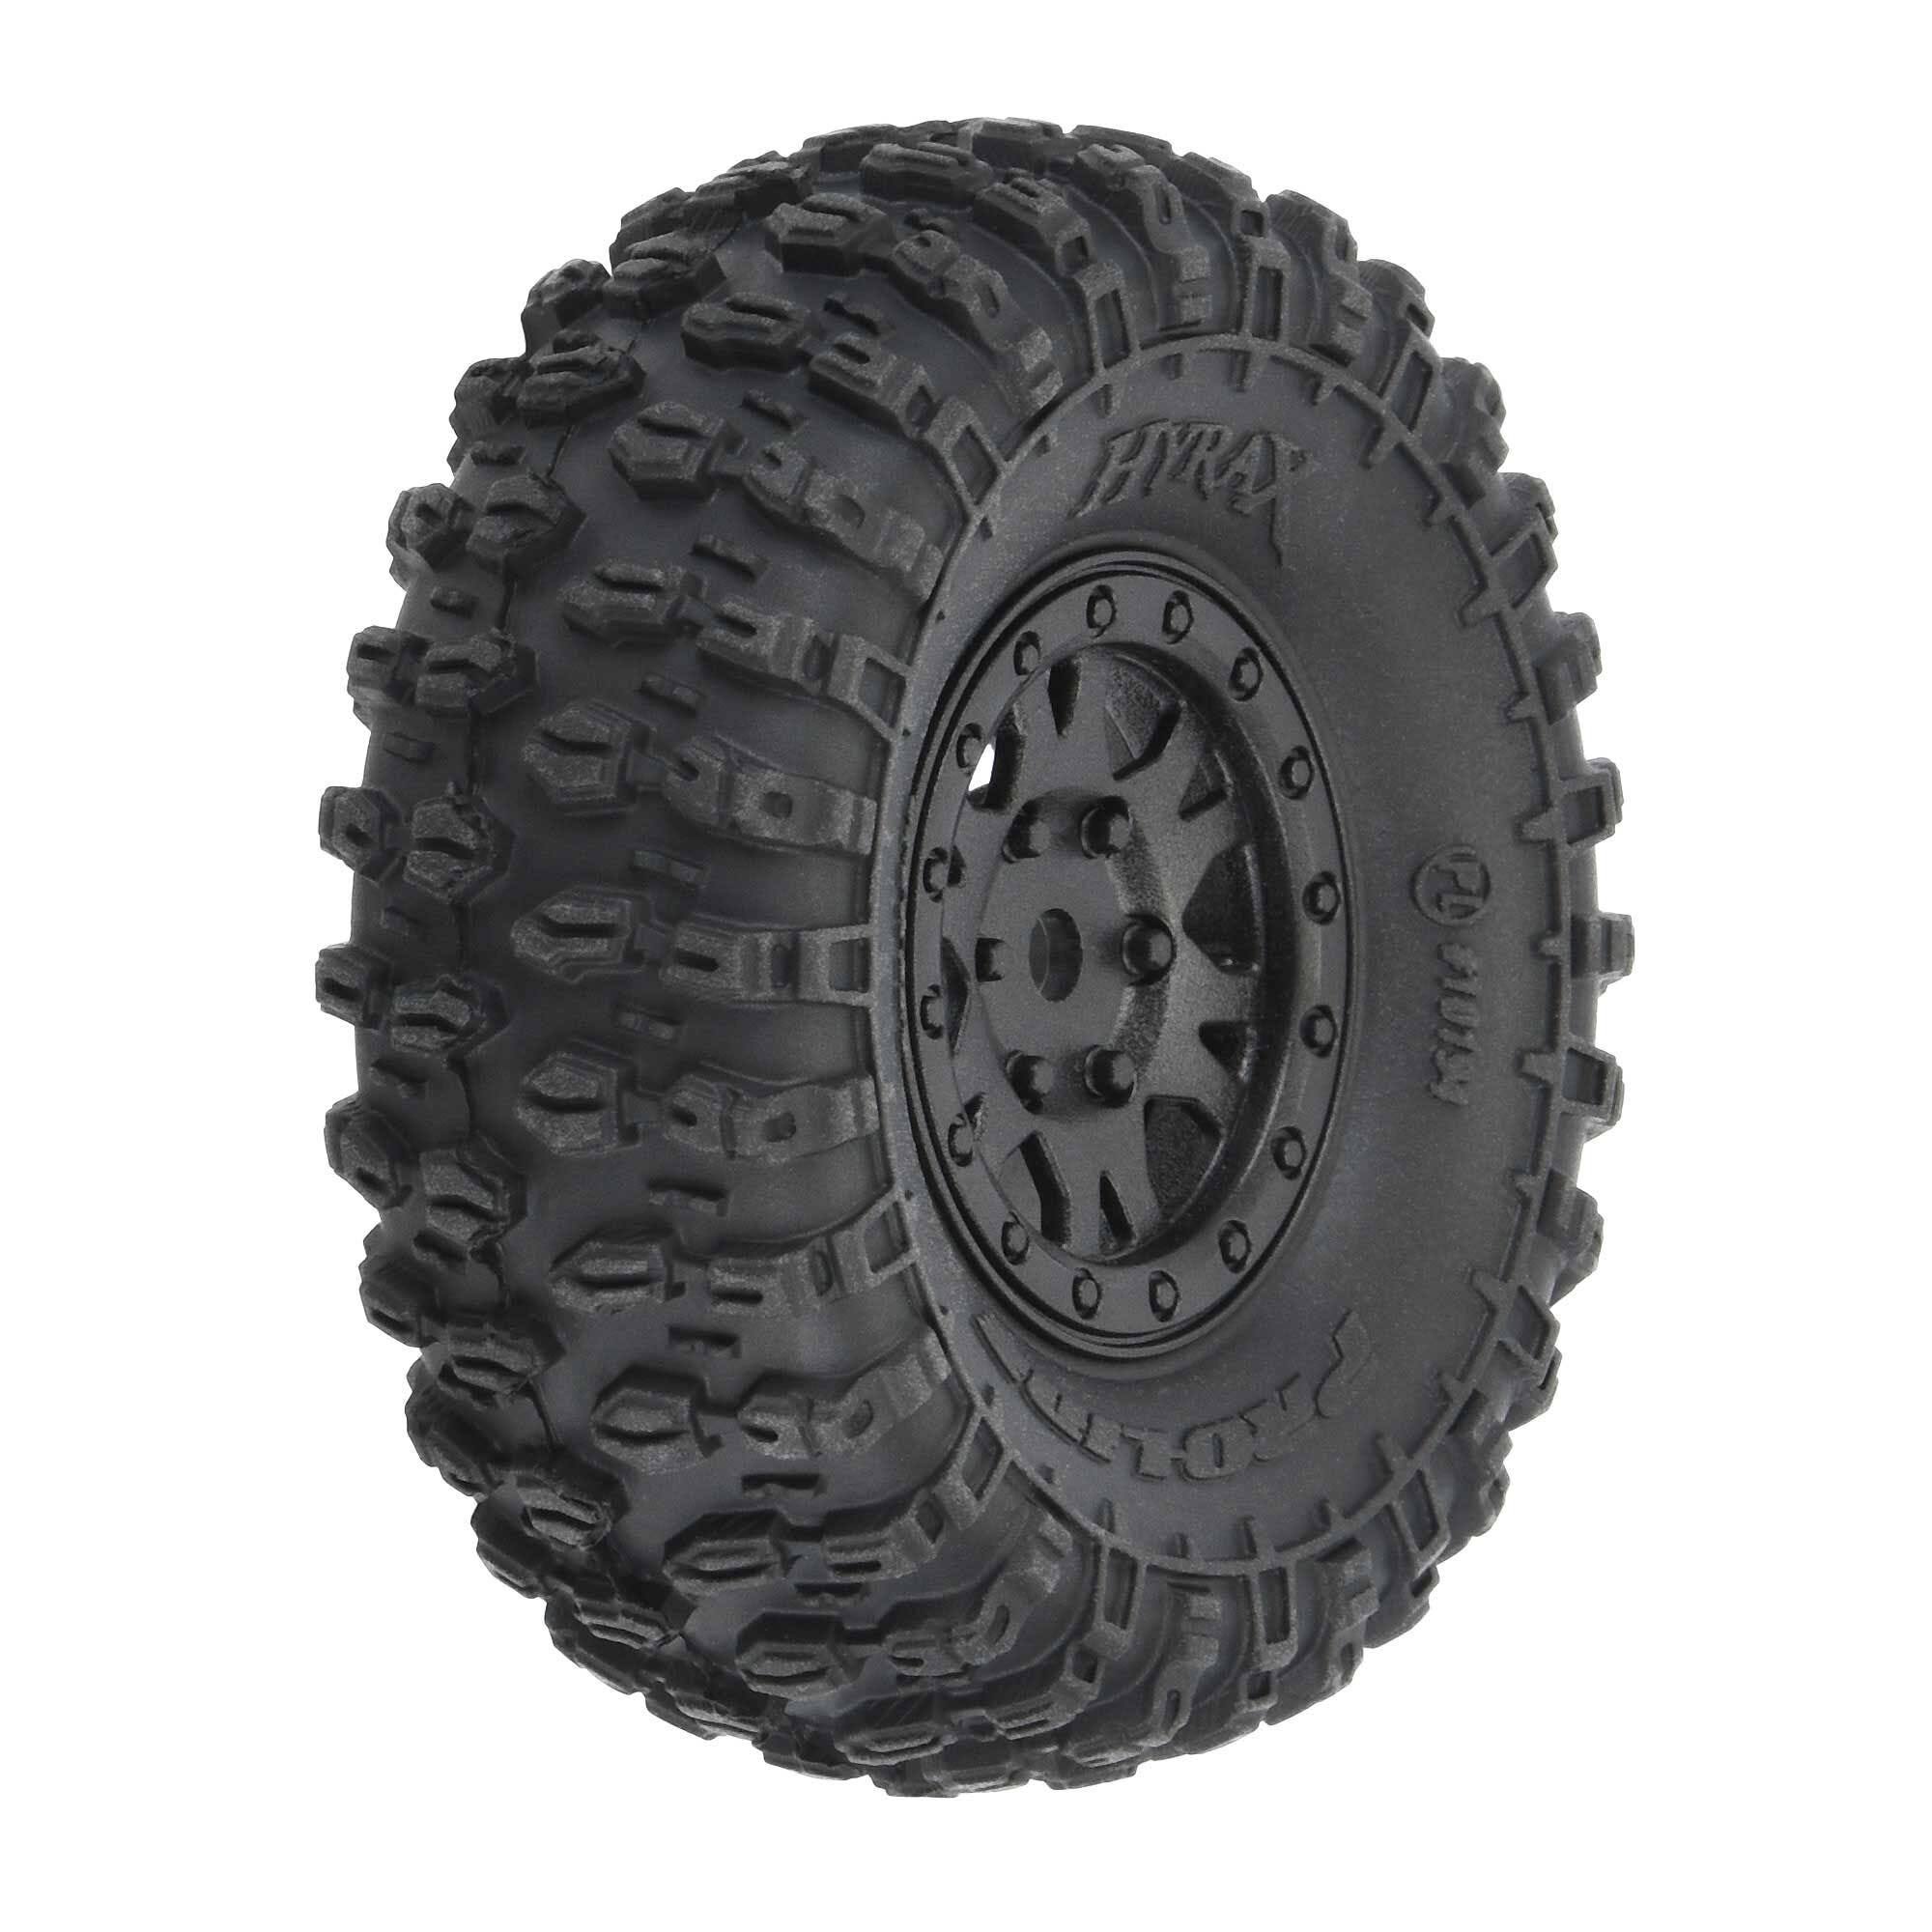 Proline 10194-10 Hyrax 1.0in Mounted Tyres (4-Pack) for SCX24